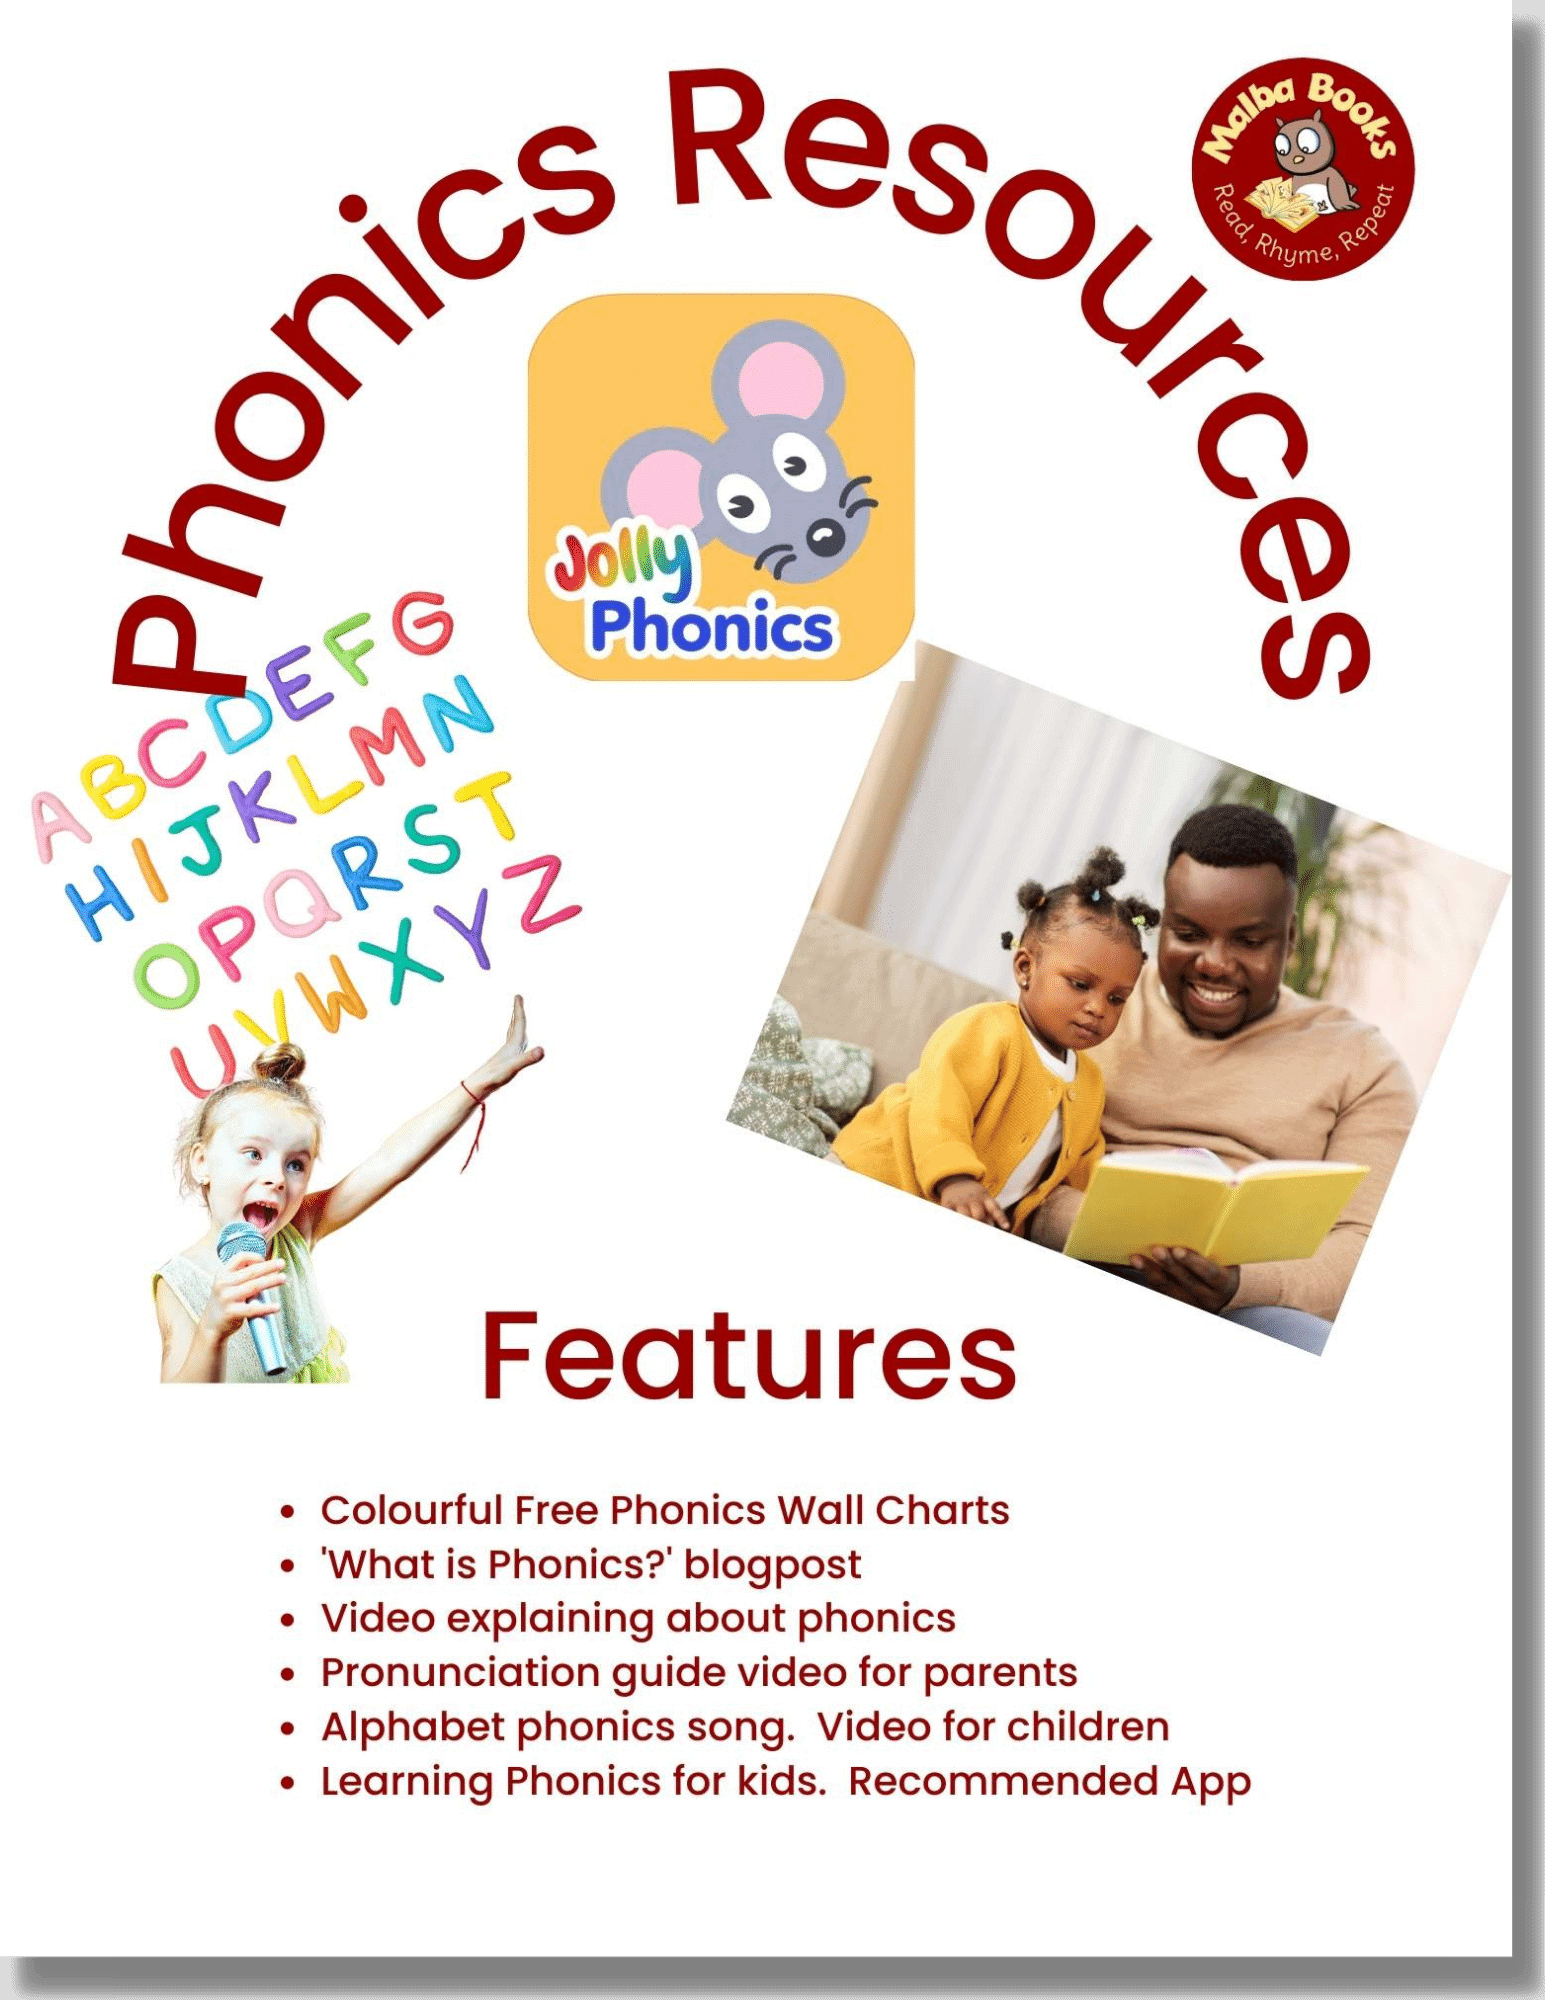 Text says 'Phonics Resources Features' followed by a list blog, videos chart app etc recommended. Images show the alphabet in multi-colours, a small blonde girl singing with a microphone, a man reading to a little girl with multiple pony tails and the Jolly phonics mouse.